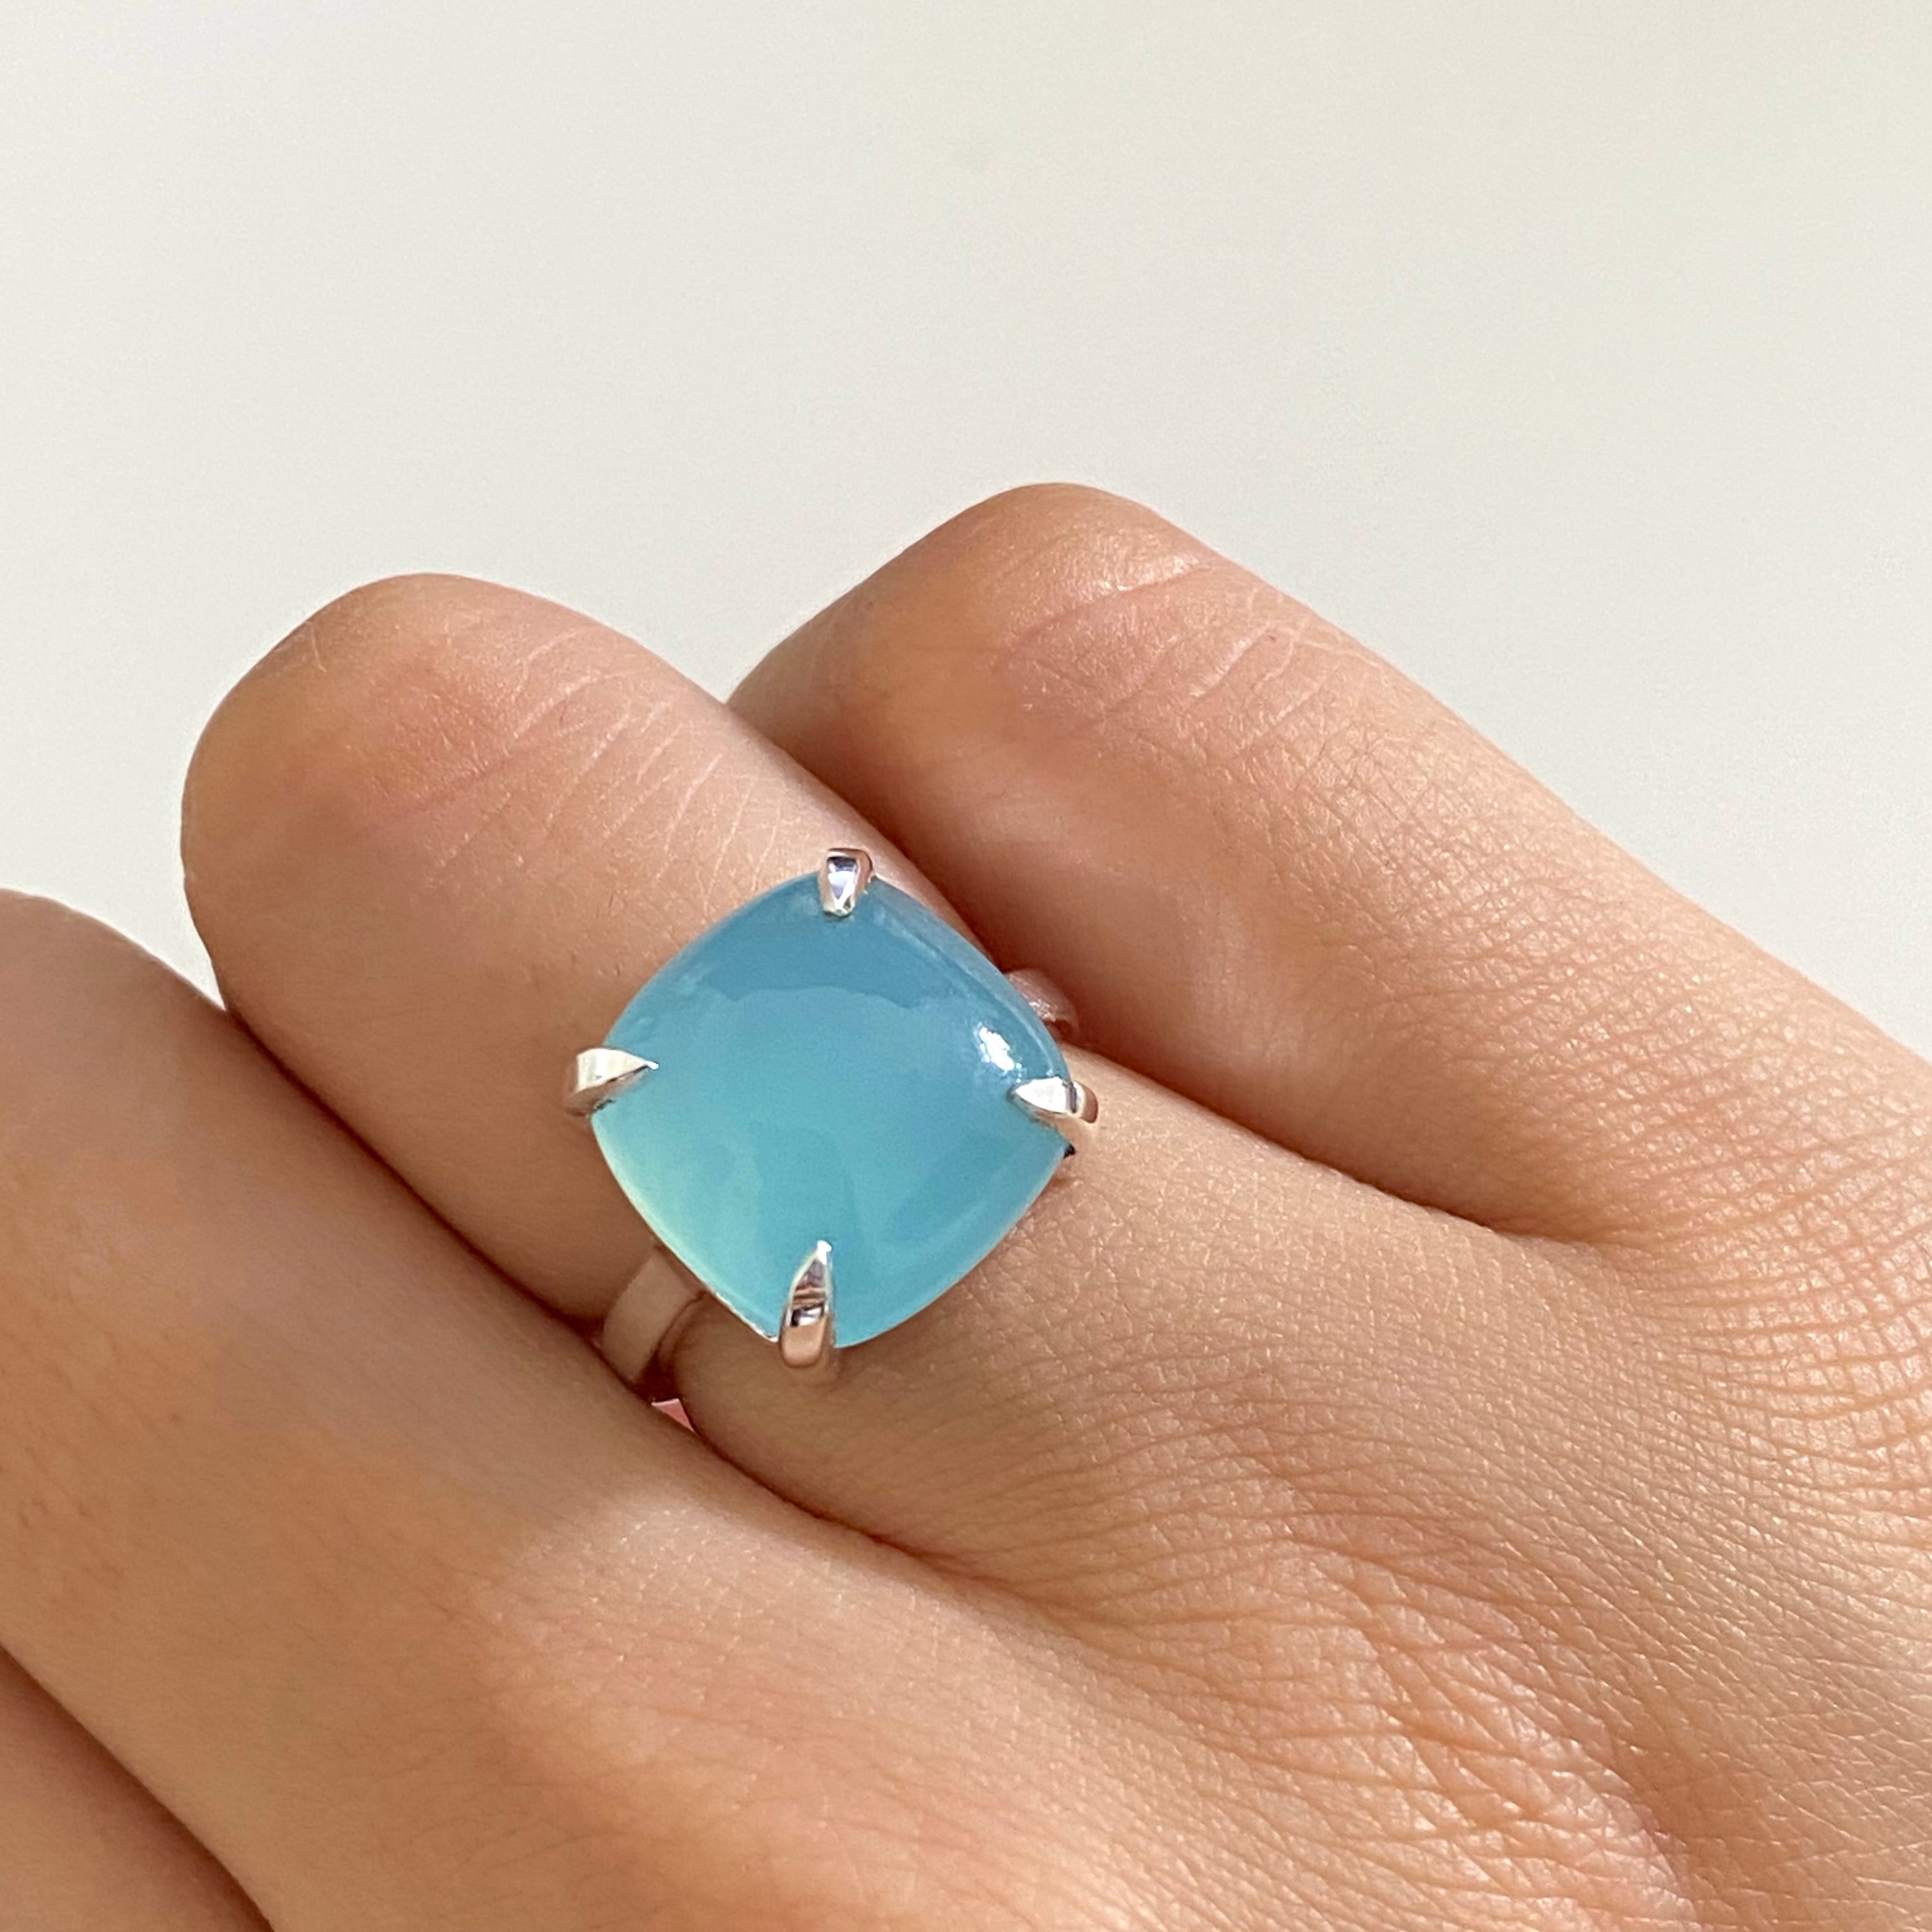 Square Cabochon Aqua Chalcedony Ring in Sterling Silver